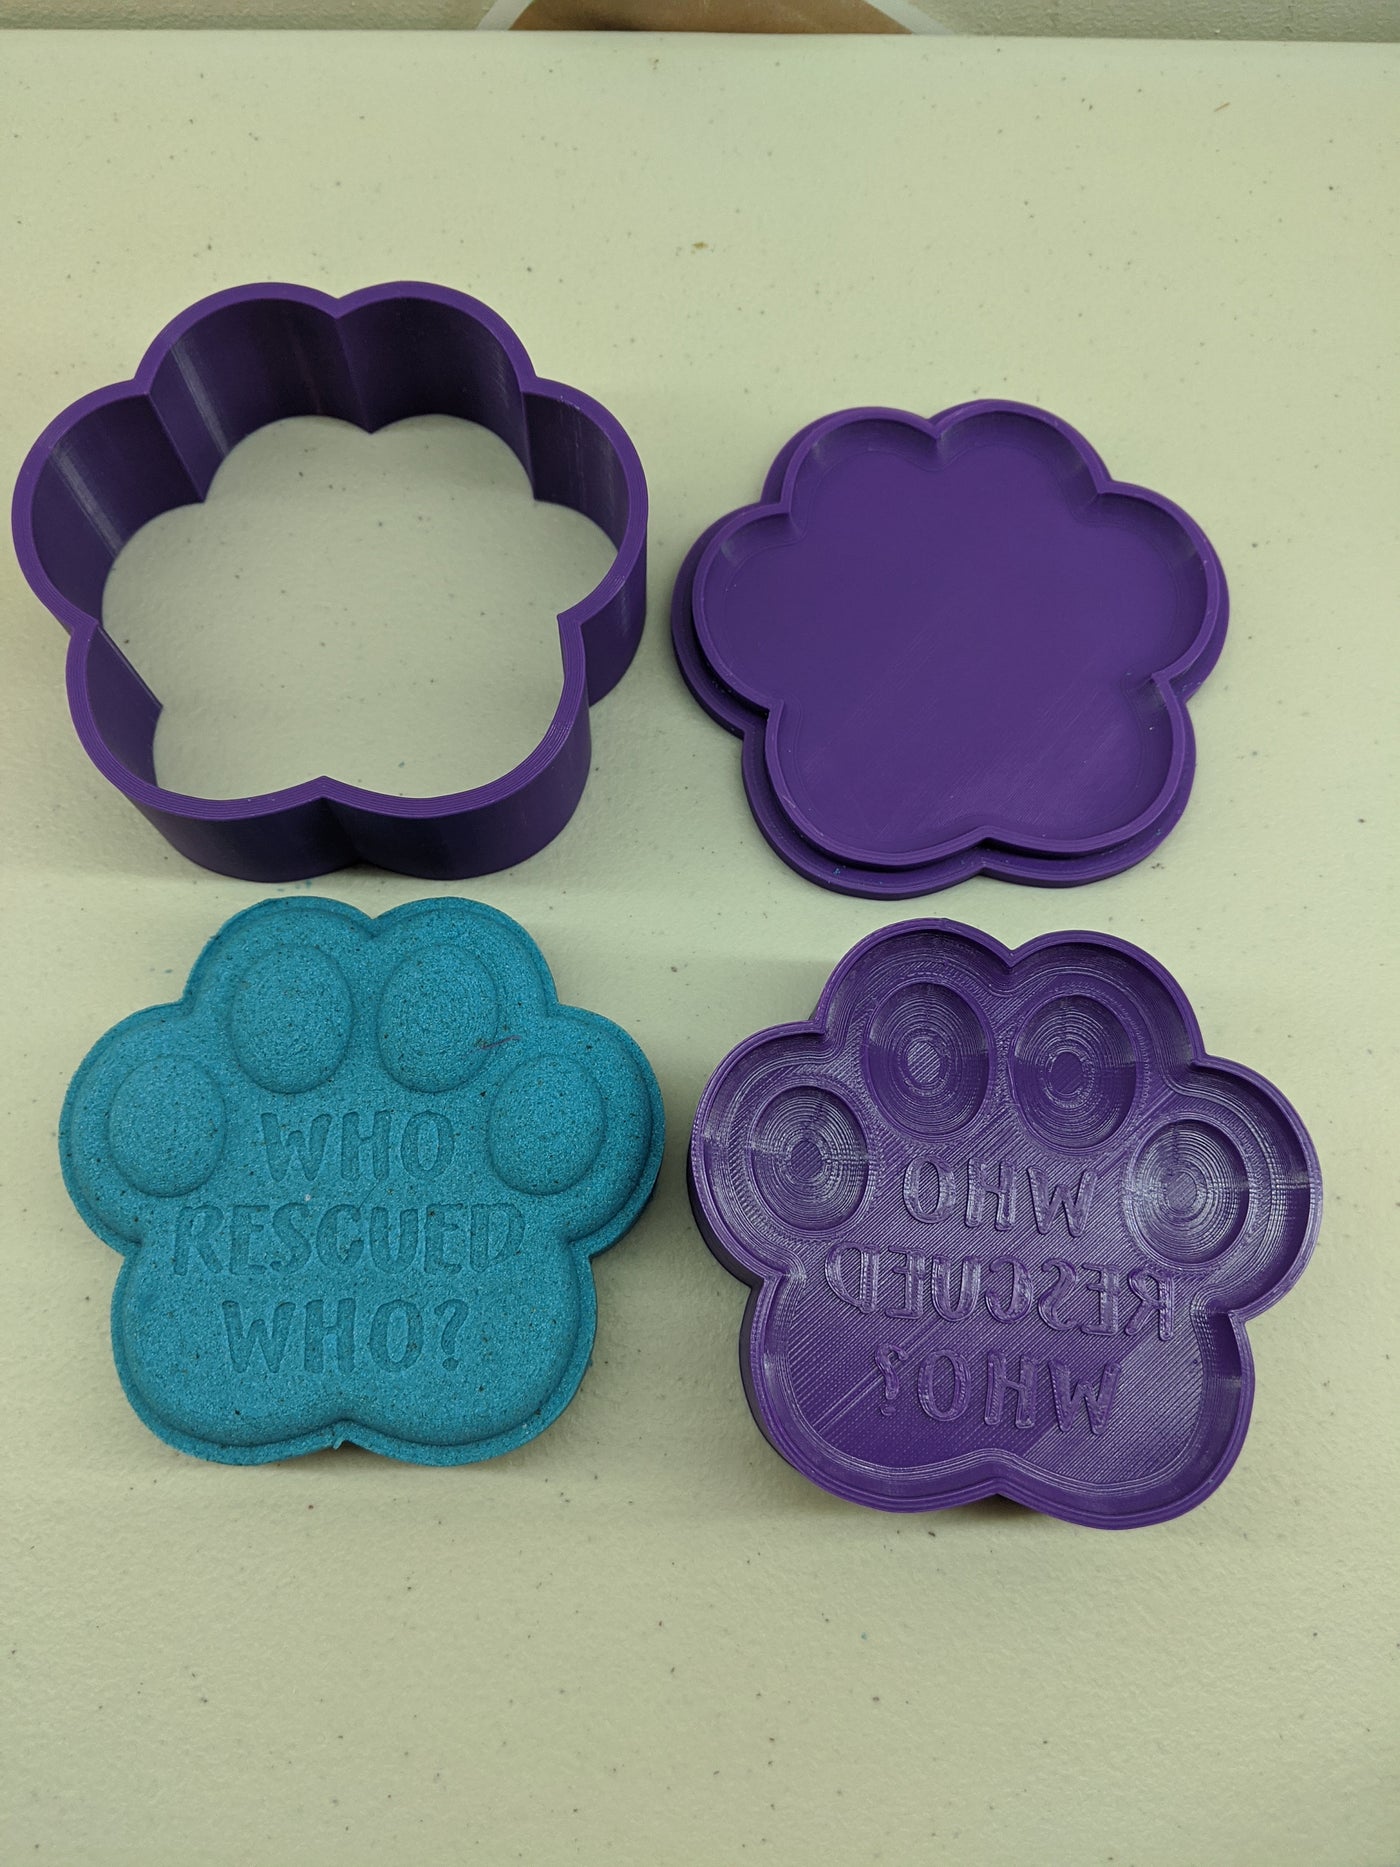 Who Rescued Who? Cat Paw Print Bath Bomb Mold